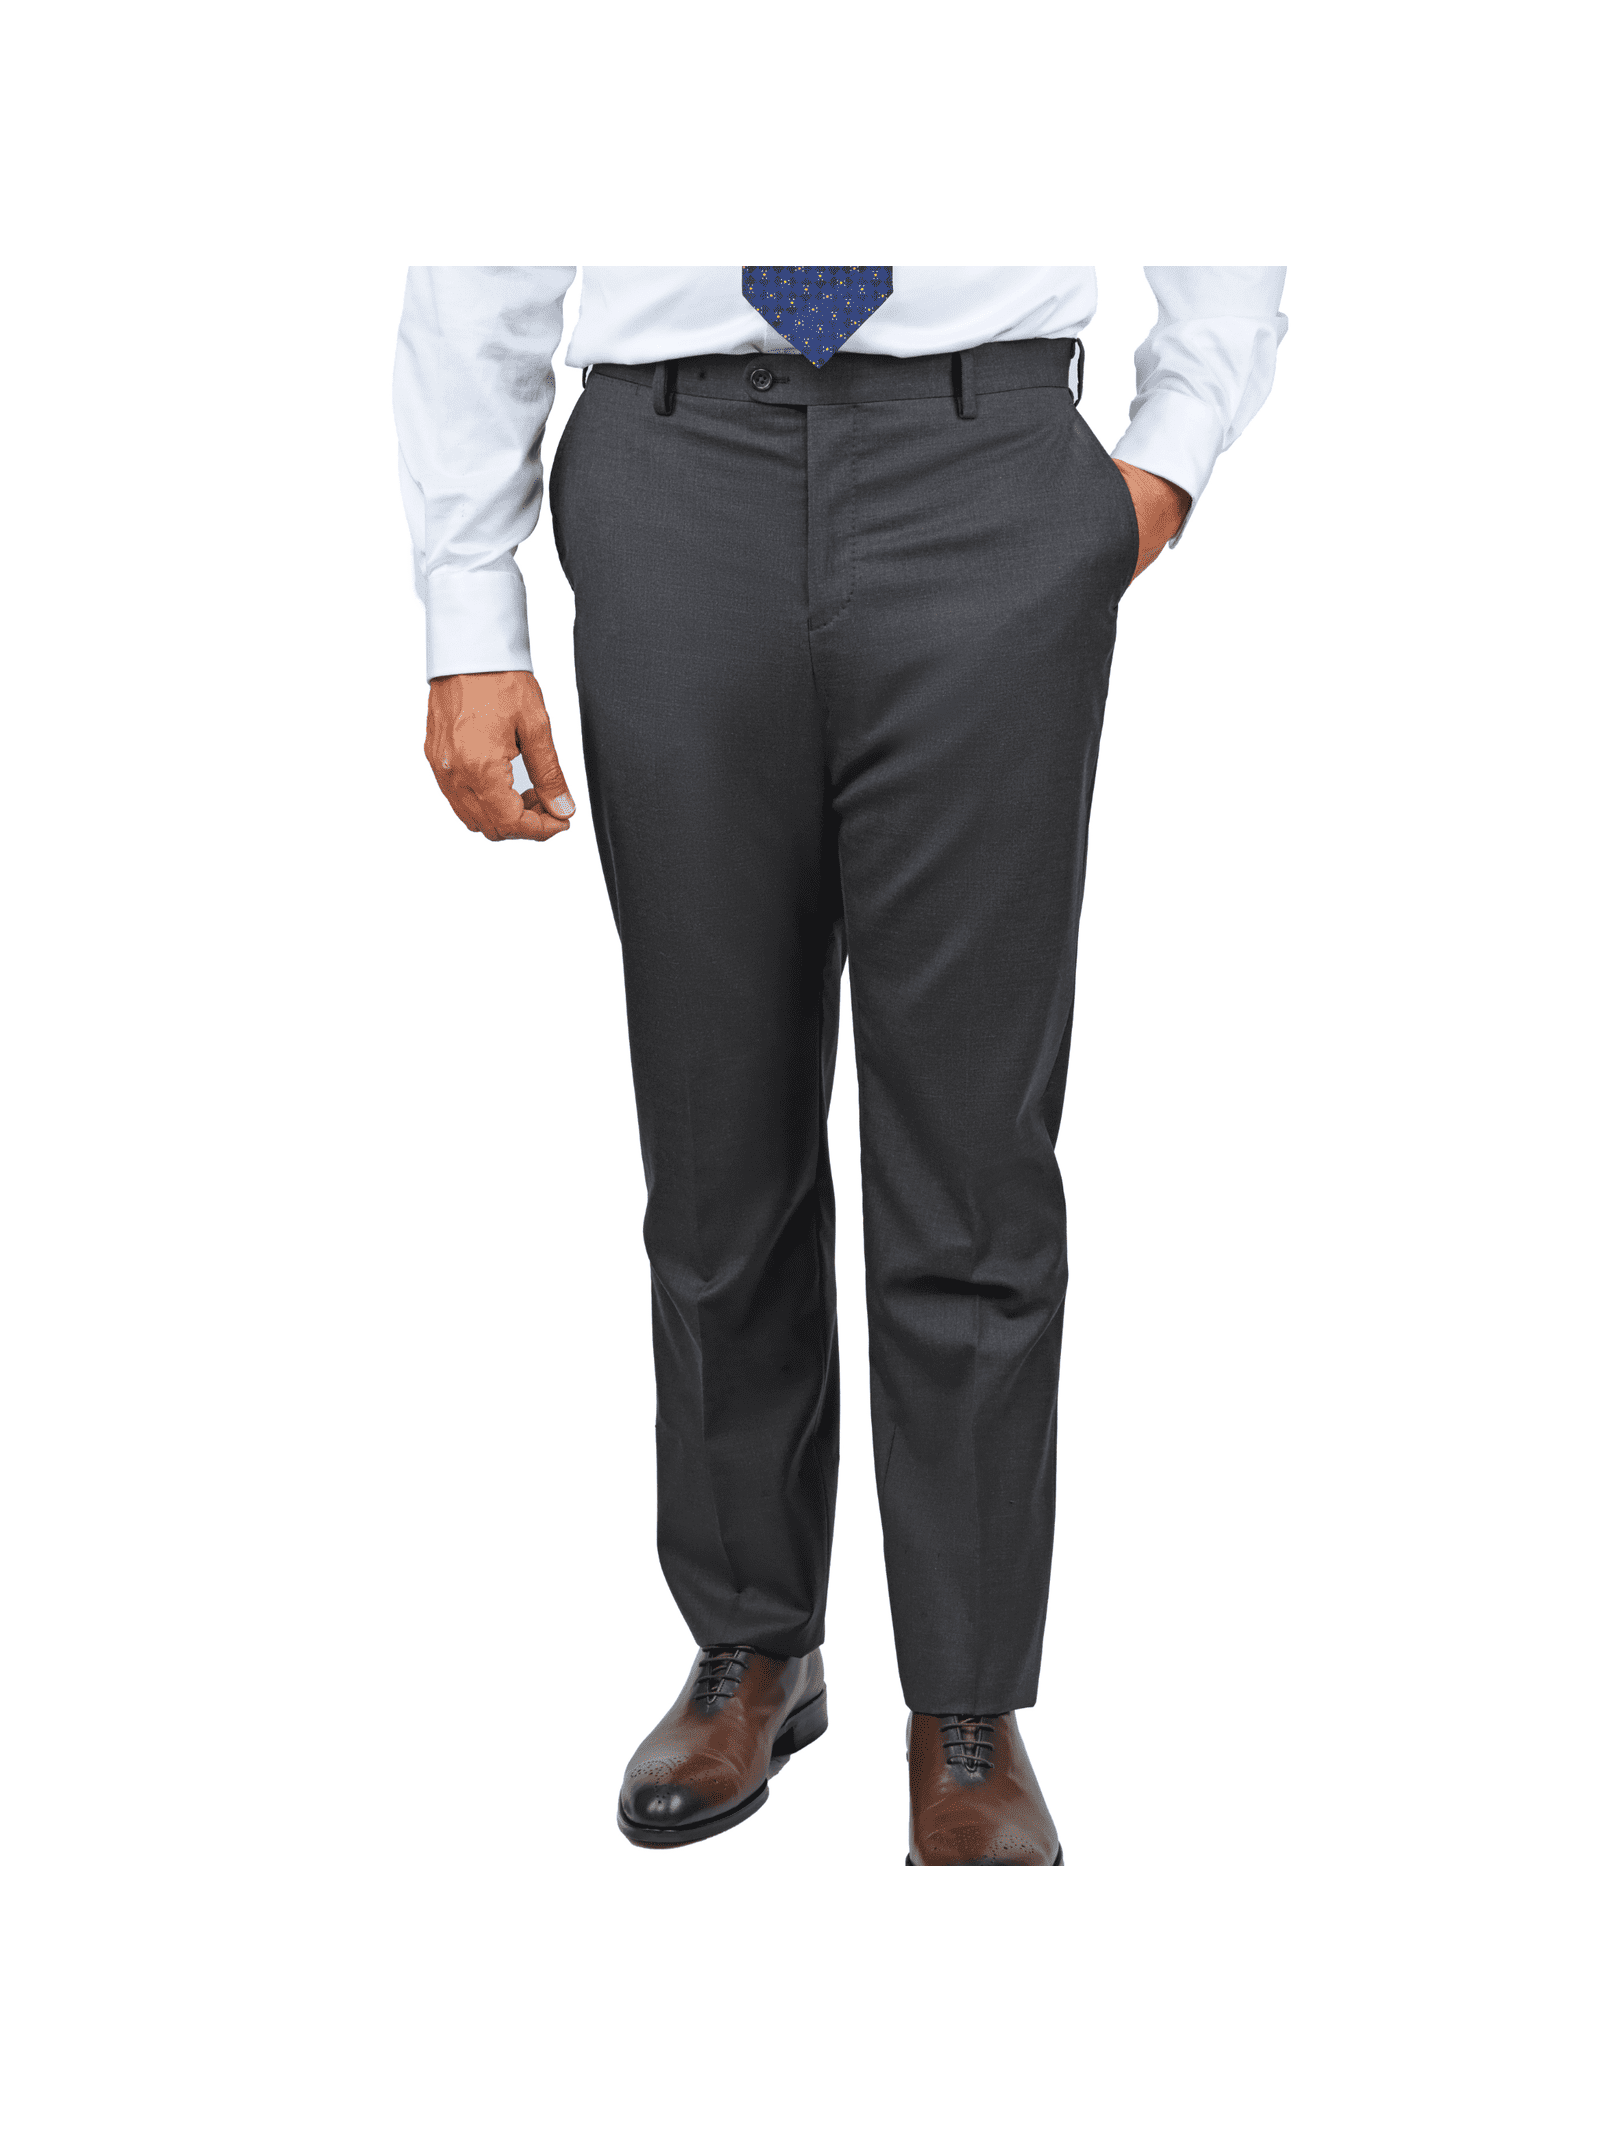 Urban Life Charcoal Formal Trouser,  http://www.snapdeal.com/product/urban-life-charcoal-formal-trouser/1958738023?pos=13;18  | Trousers, Urban life, Formal